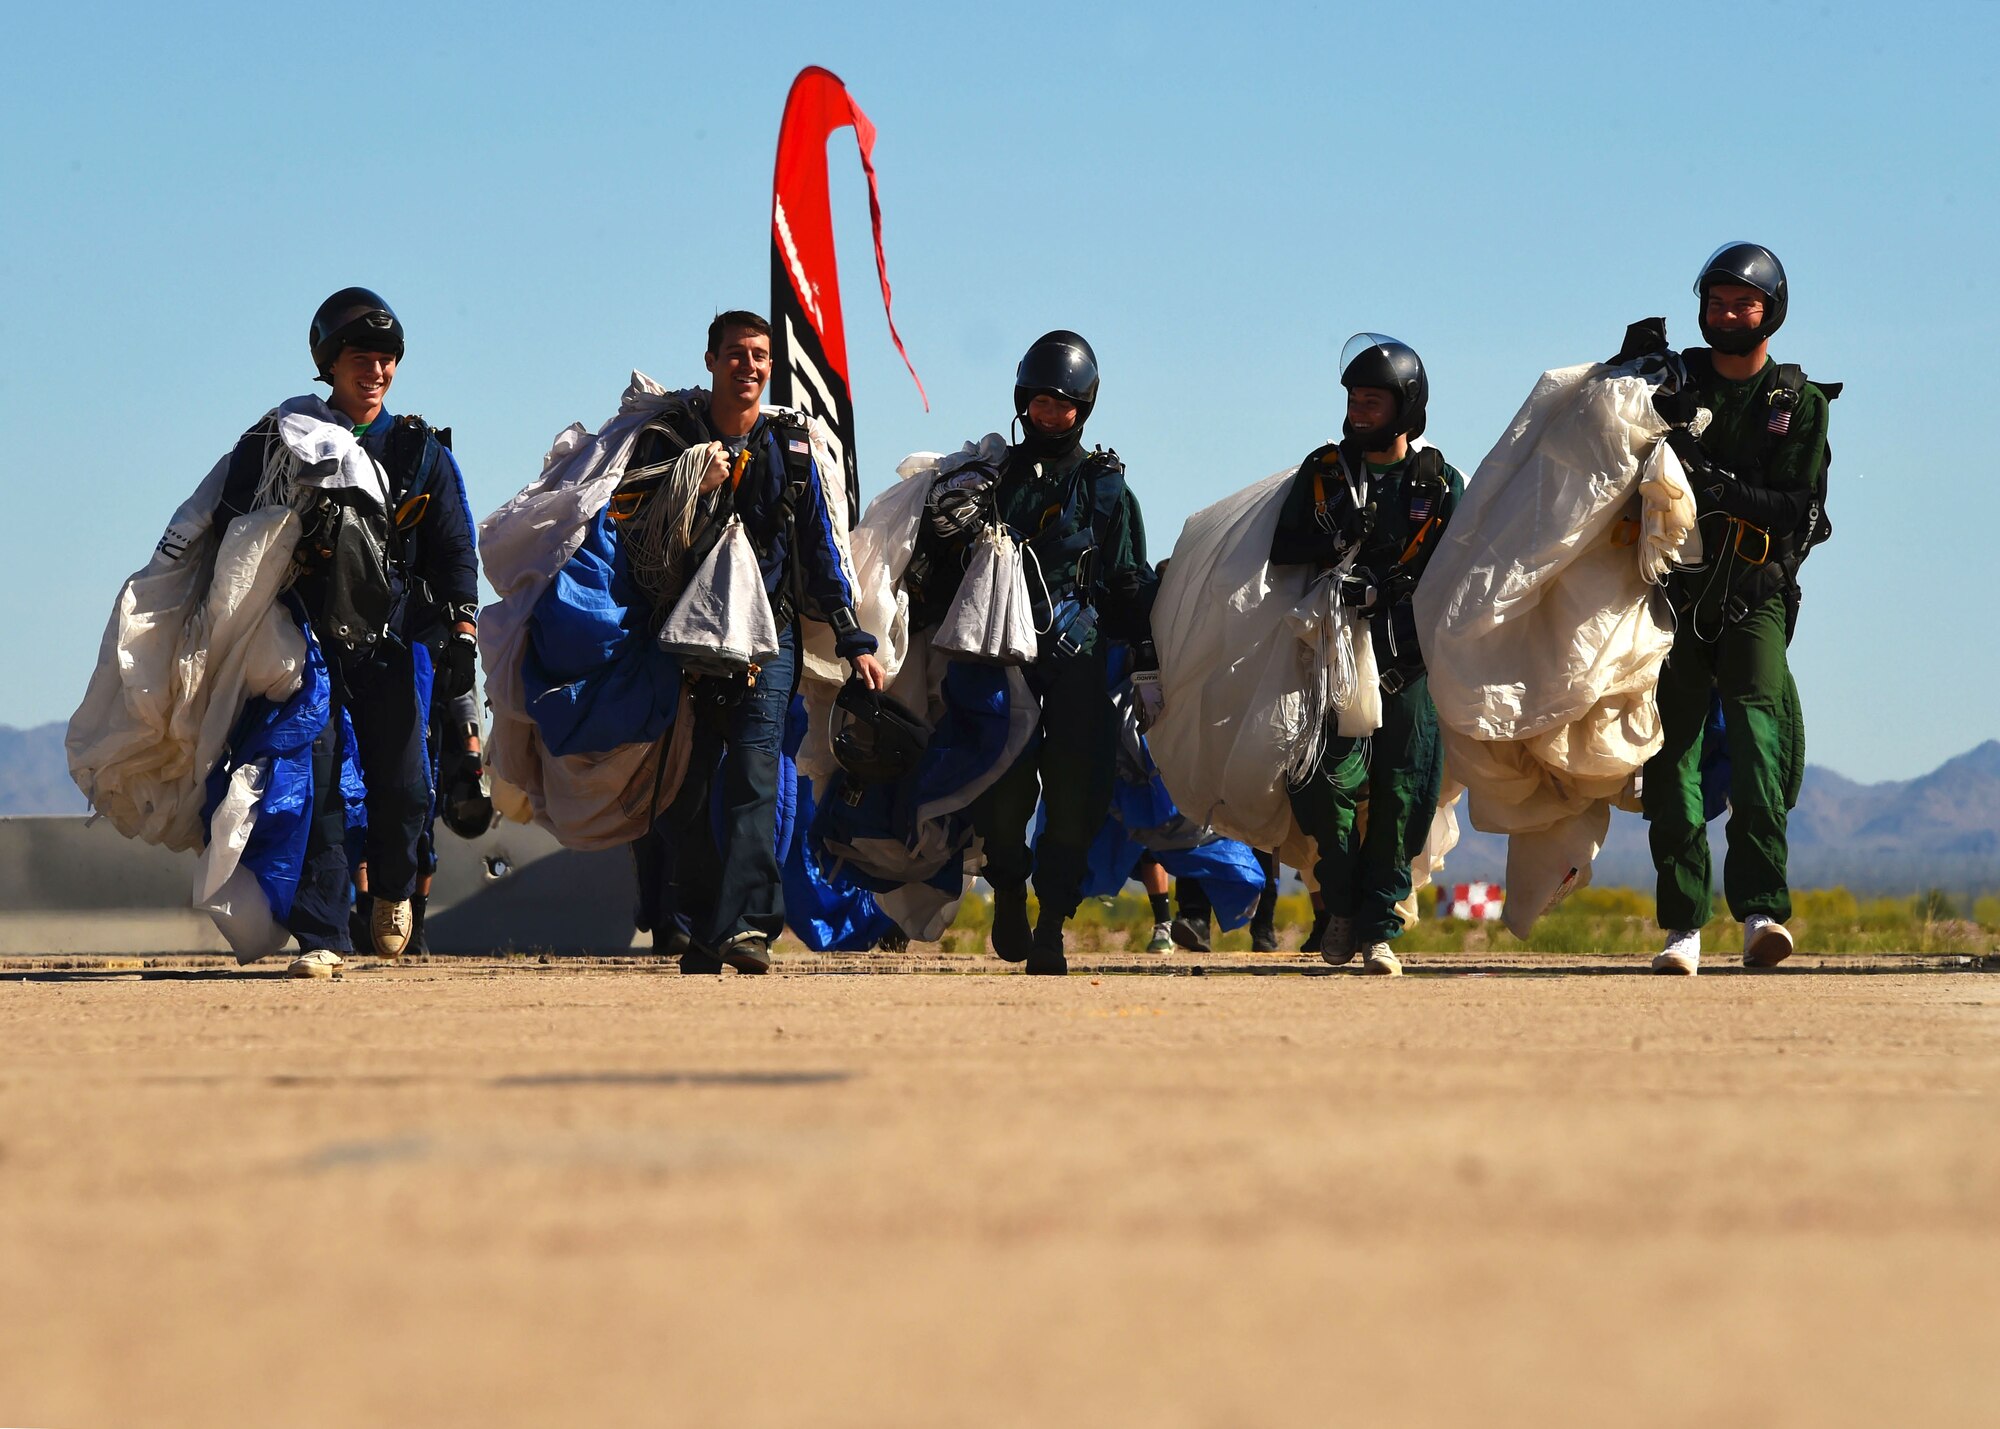 Cadets from the Wings of Blue Parachute team walk back to the hangar after a successful jump from approximately 12,000 feet, March 29, 2017 at the Barry M. Goldwater Range in Gila Bend, Ariz. The Wings of Blue organizes more than 19,000 training jumps annually and more than 2,000 of those will be conducted during the team’s time at Gila Bend. (U.S. Air Force photo by Airman 1st Class Caleb Worpel)